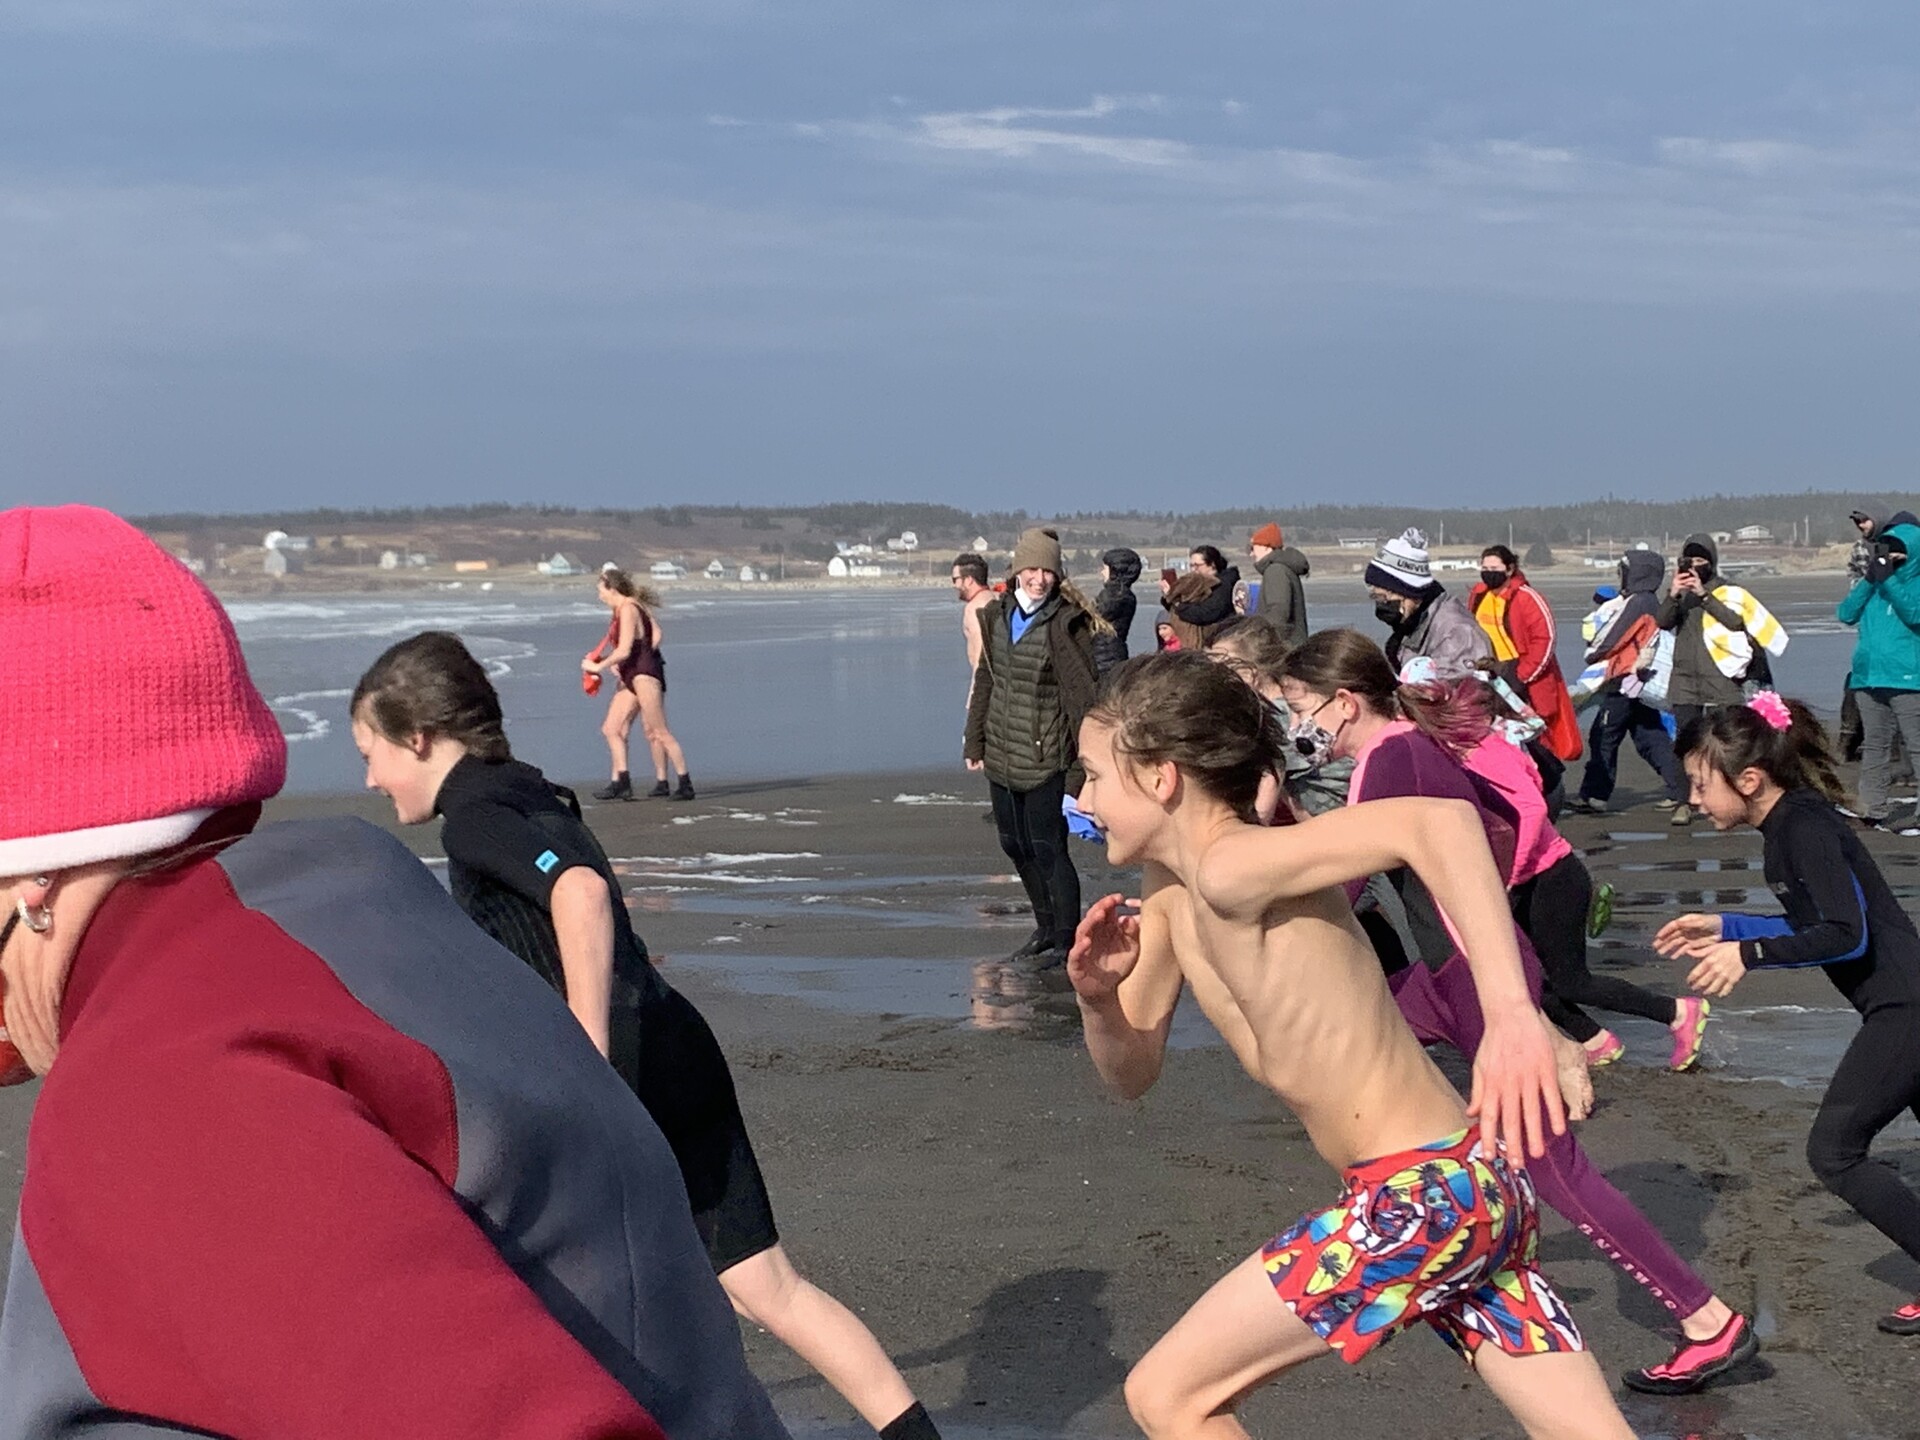 People running into the ocean